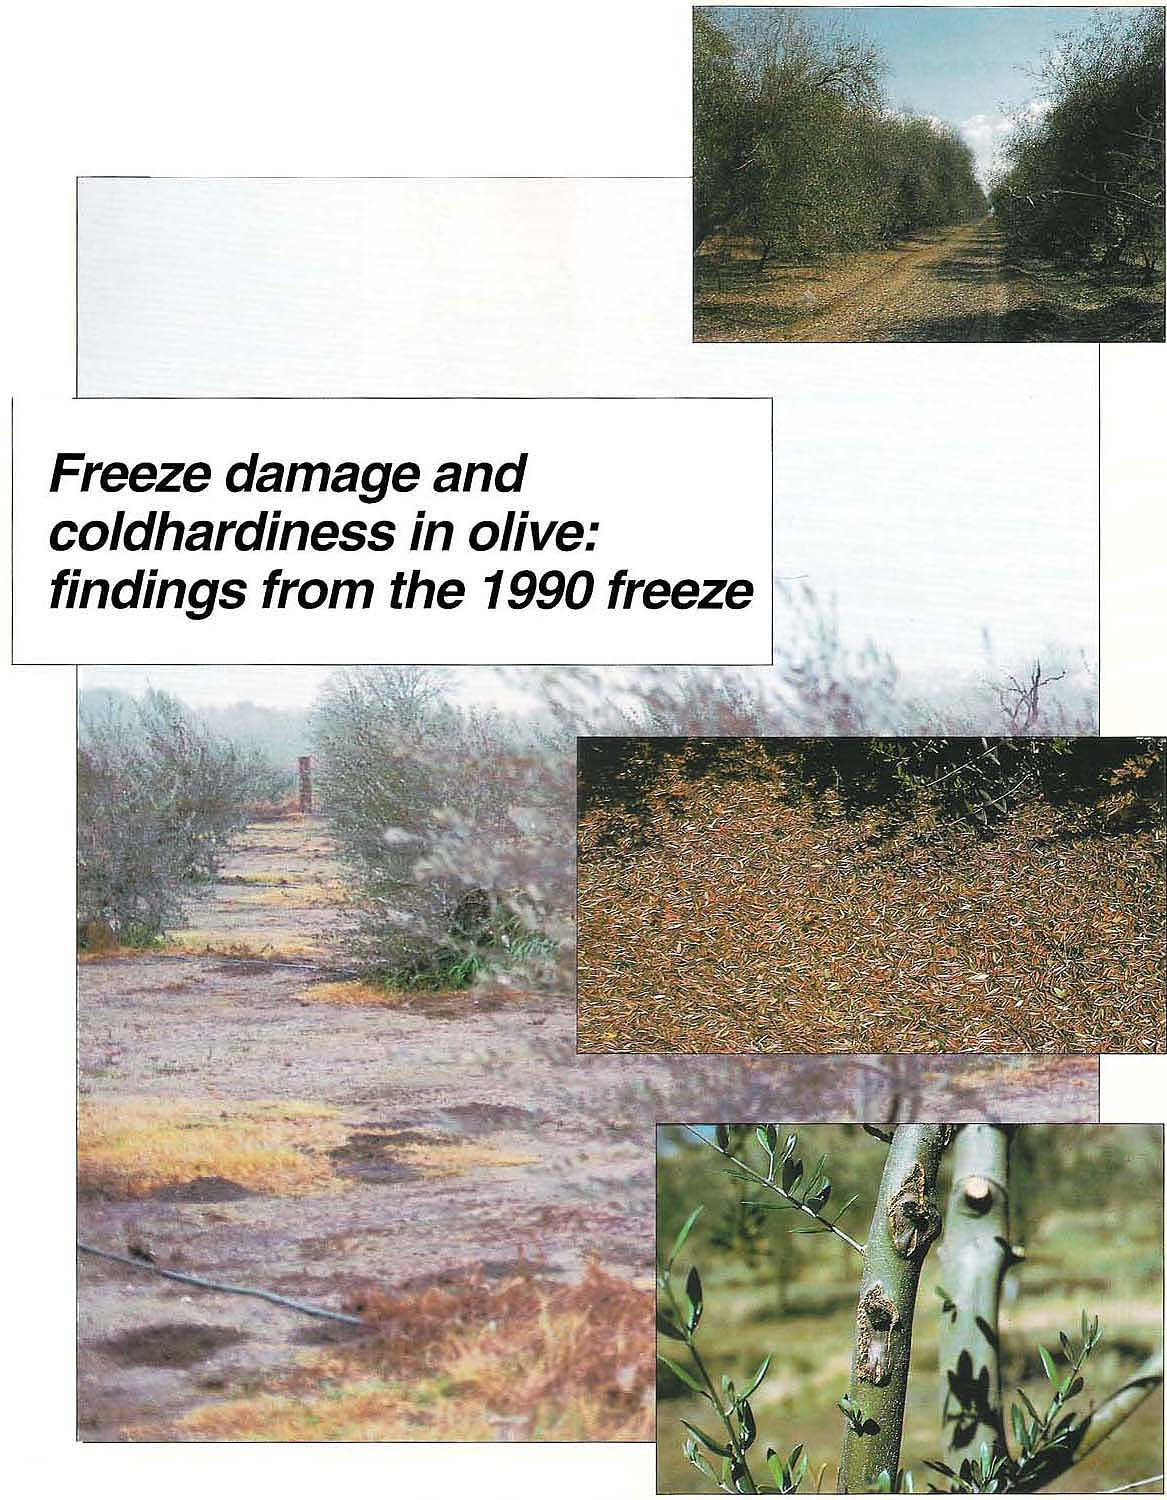 Freeze damage and coldhardiness in olive: findings from the 1990 freeze